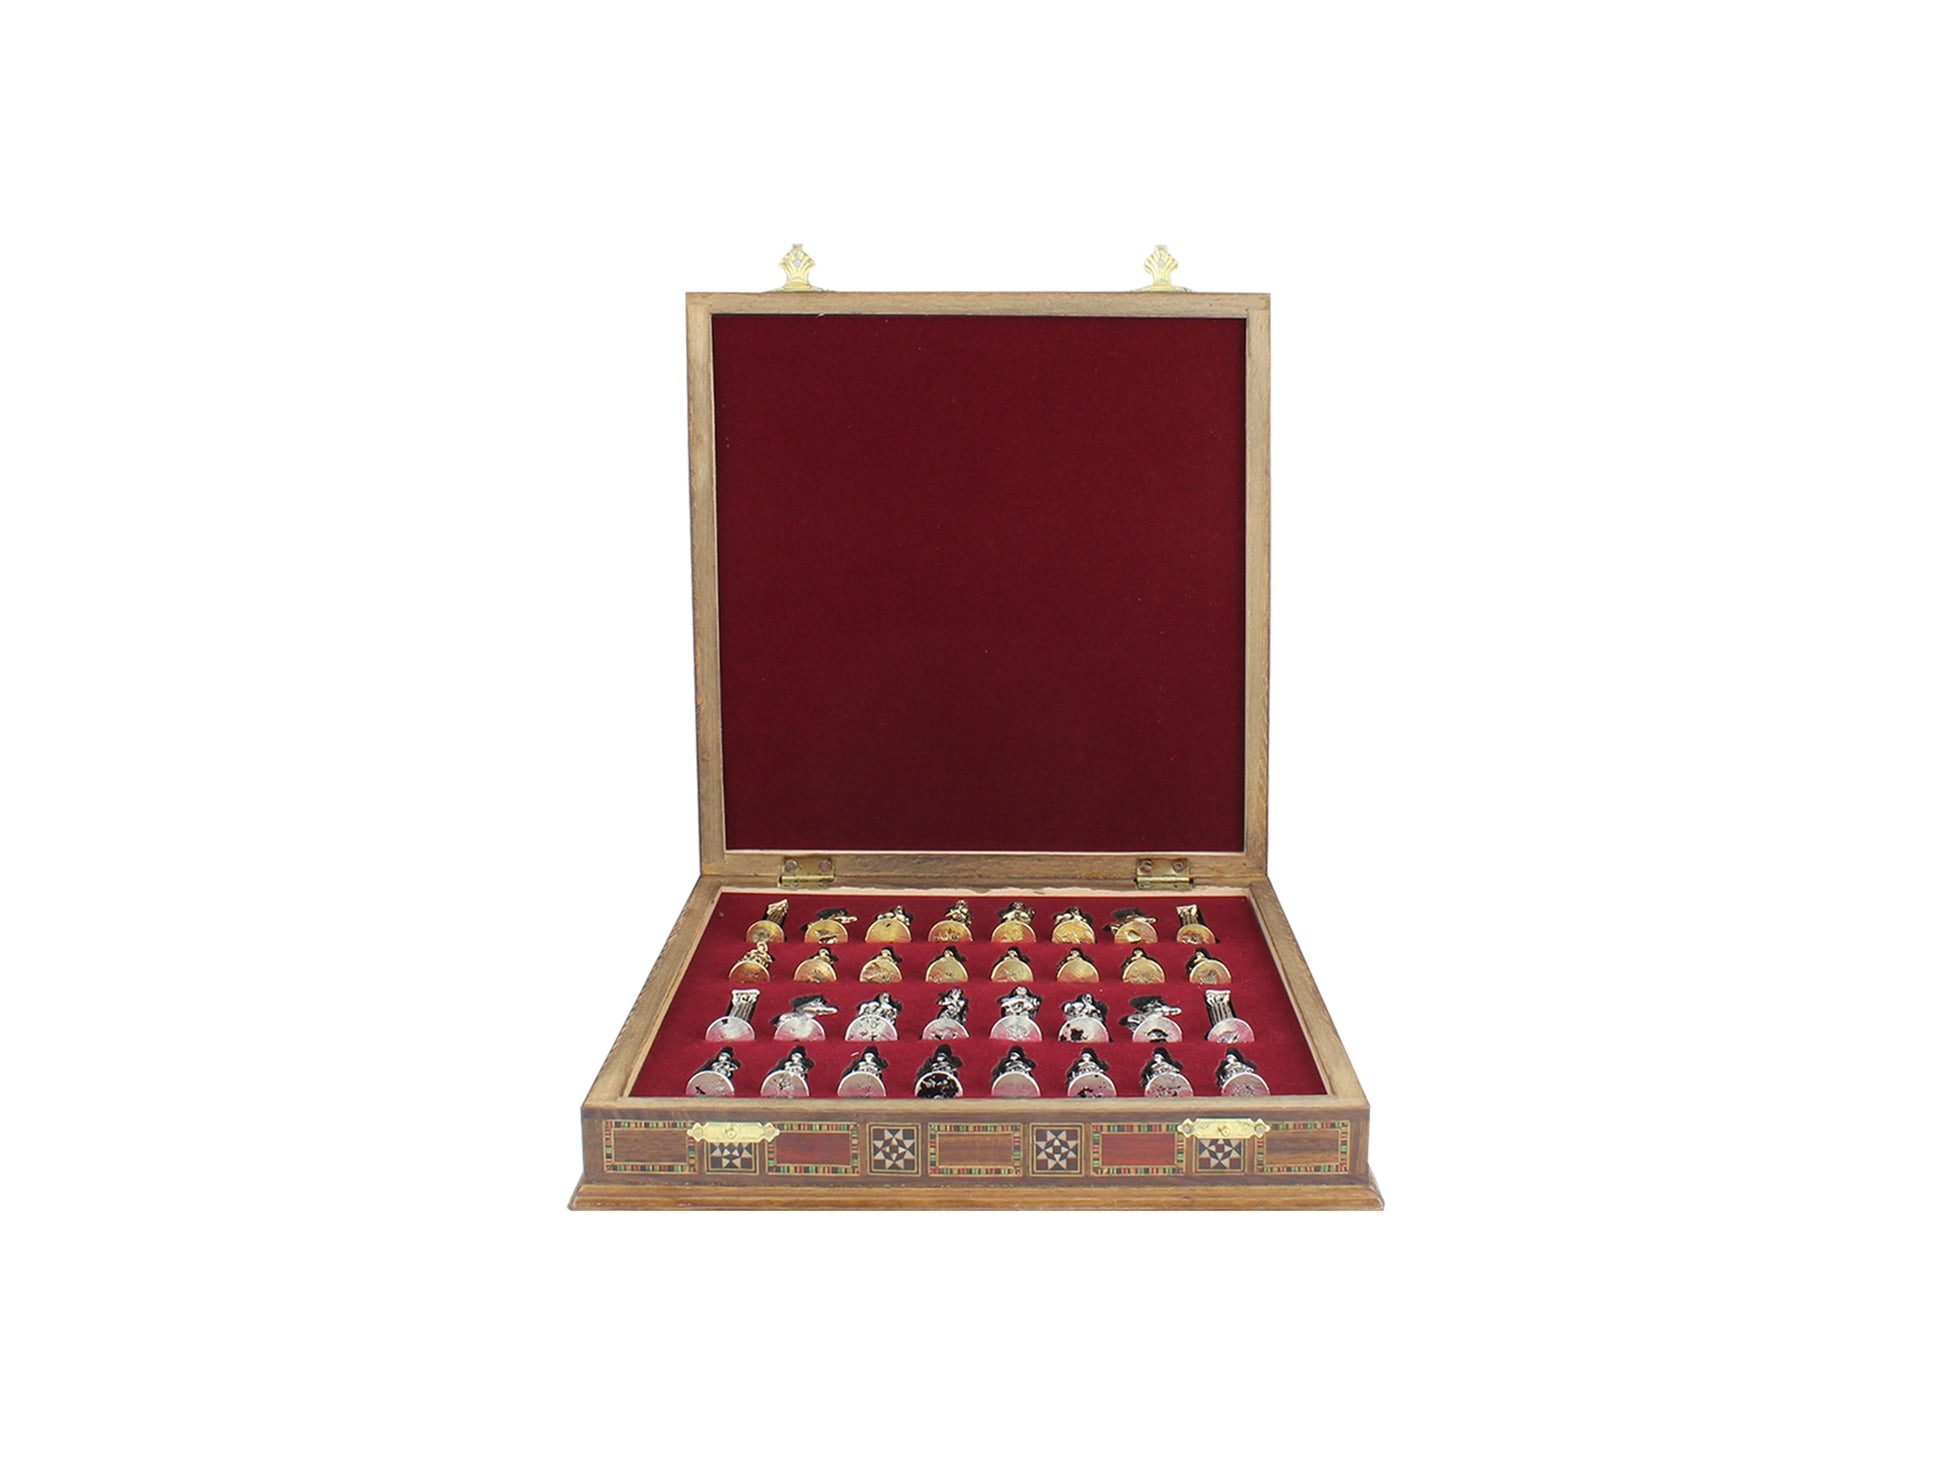 Uncustomized 10.8 Inch Rosewood Chess Box Set with Metal Roman Soldier Theme Pieces inside